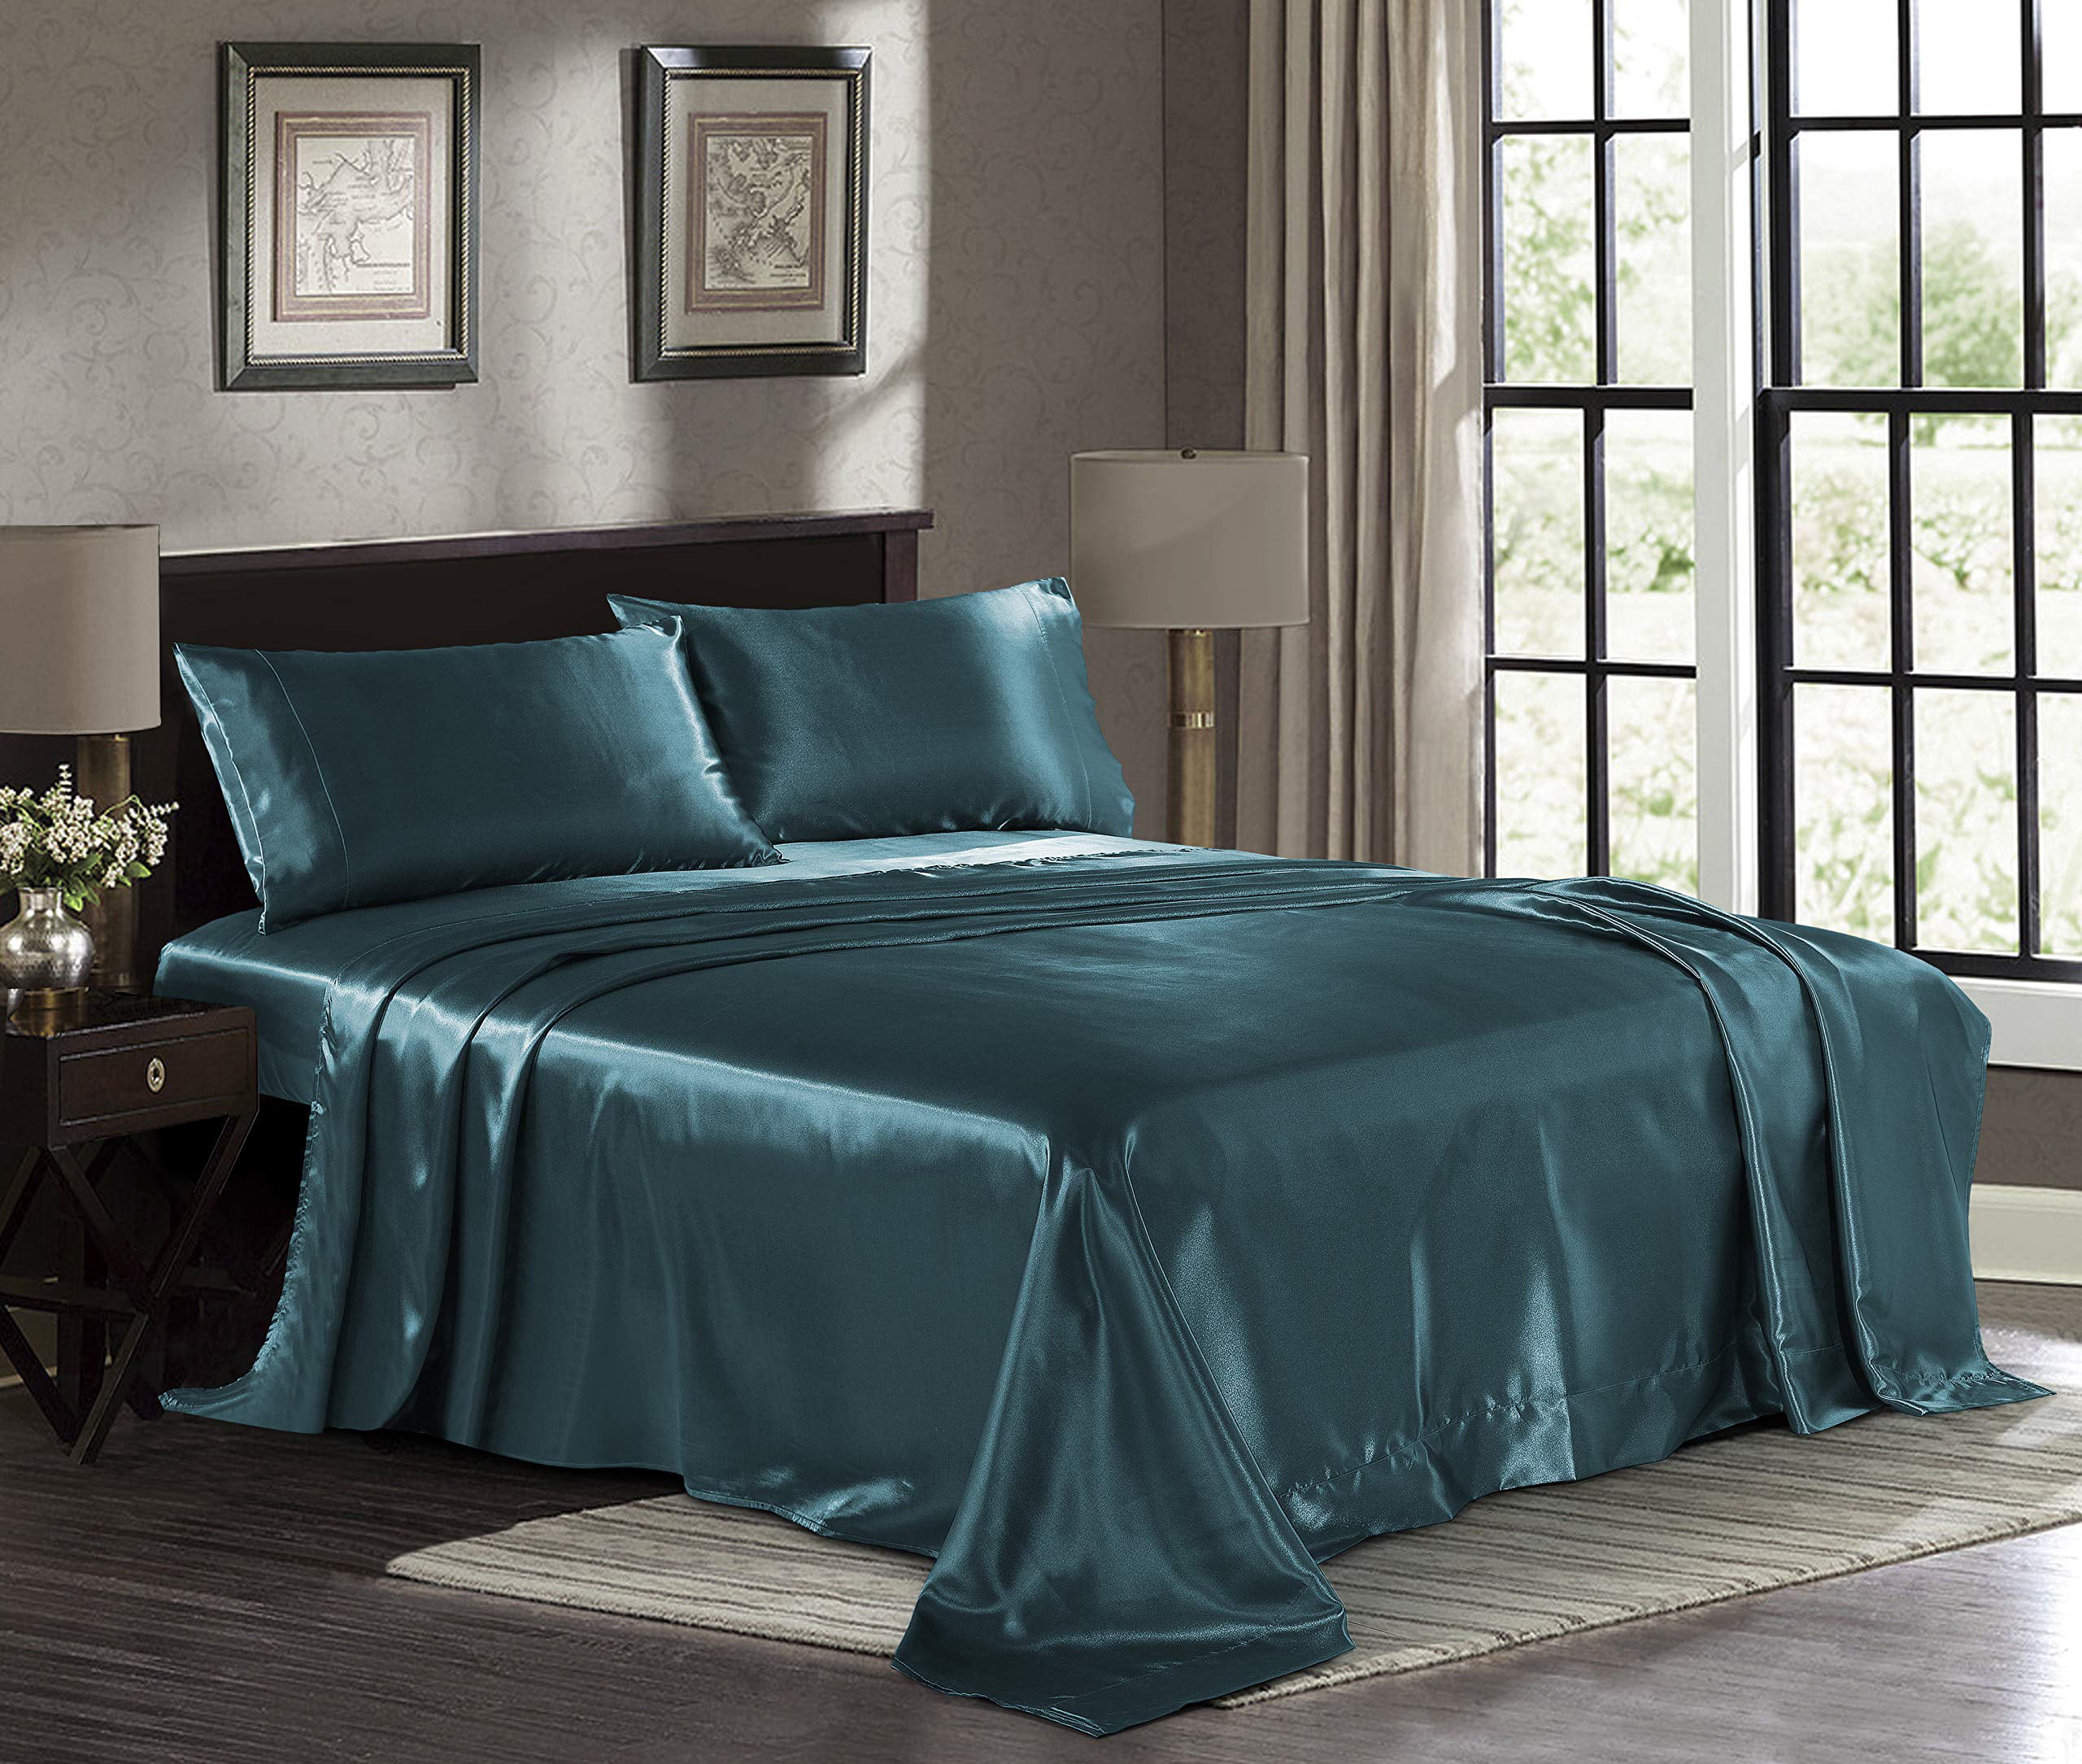 Satin Sheets Full [4Piece, Teal] Hotel Luxury Silky Bed Sheets Extra Soft 1800 Microfiber